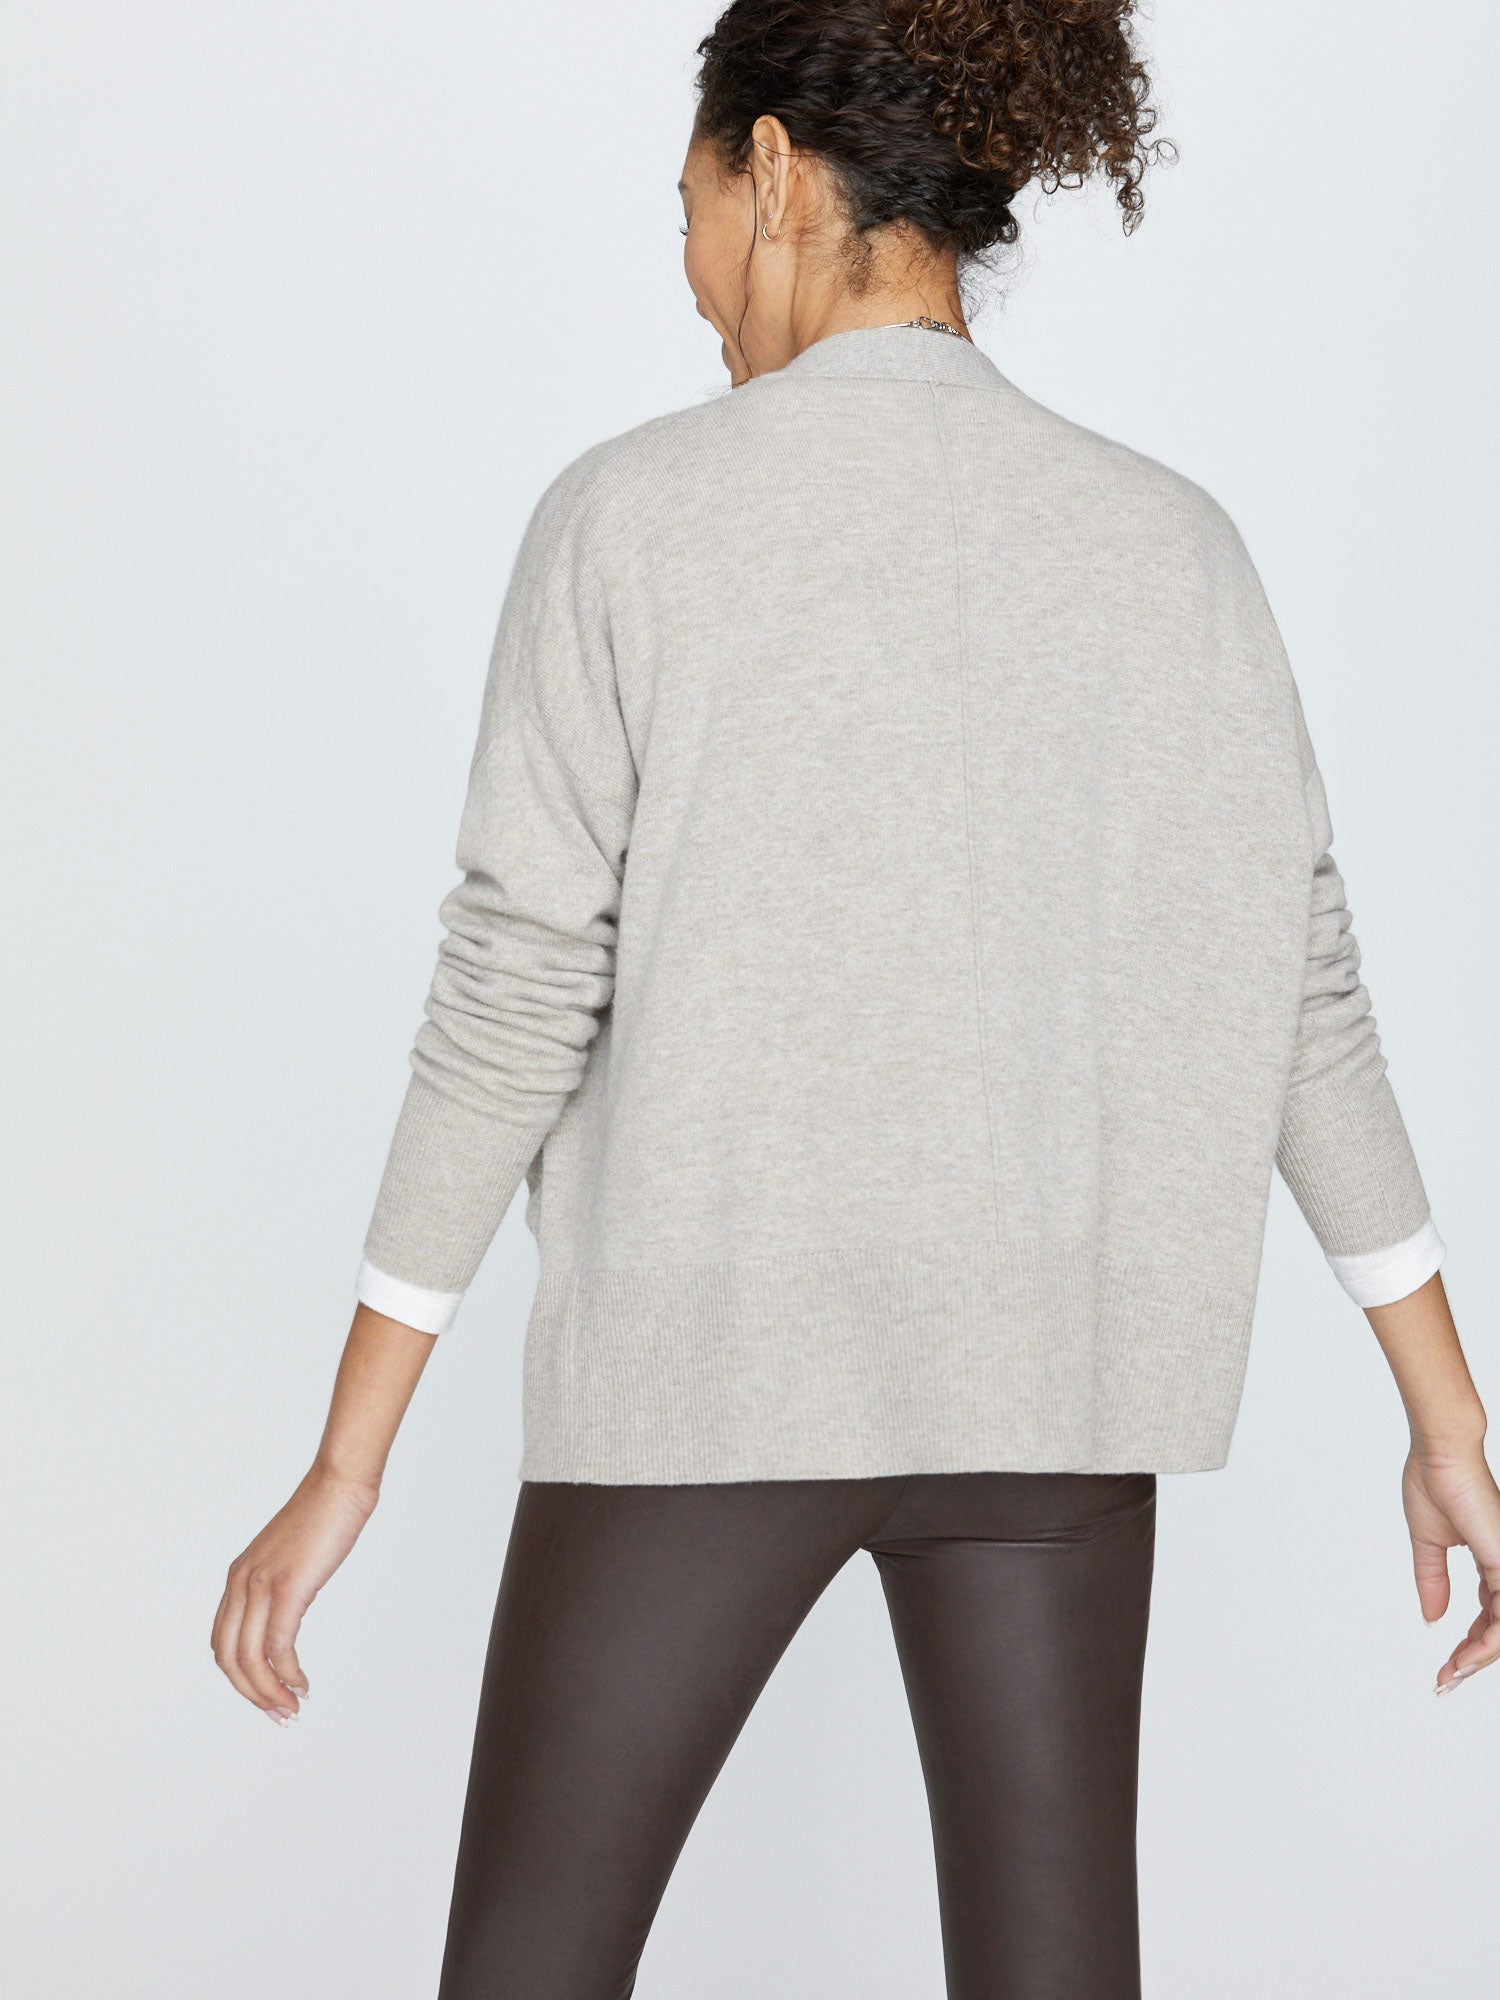 Halo light grey cashmere wool cardigan sweater back view